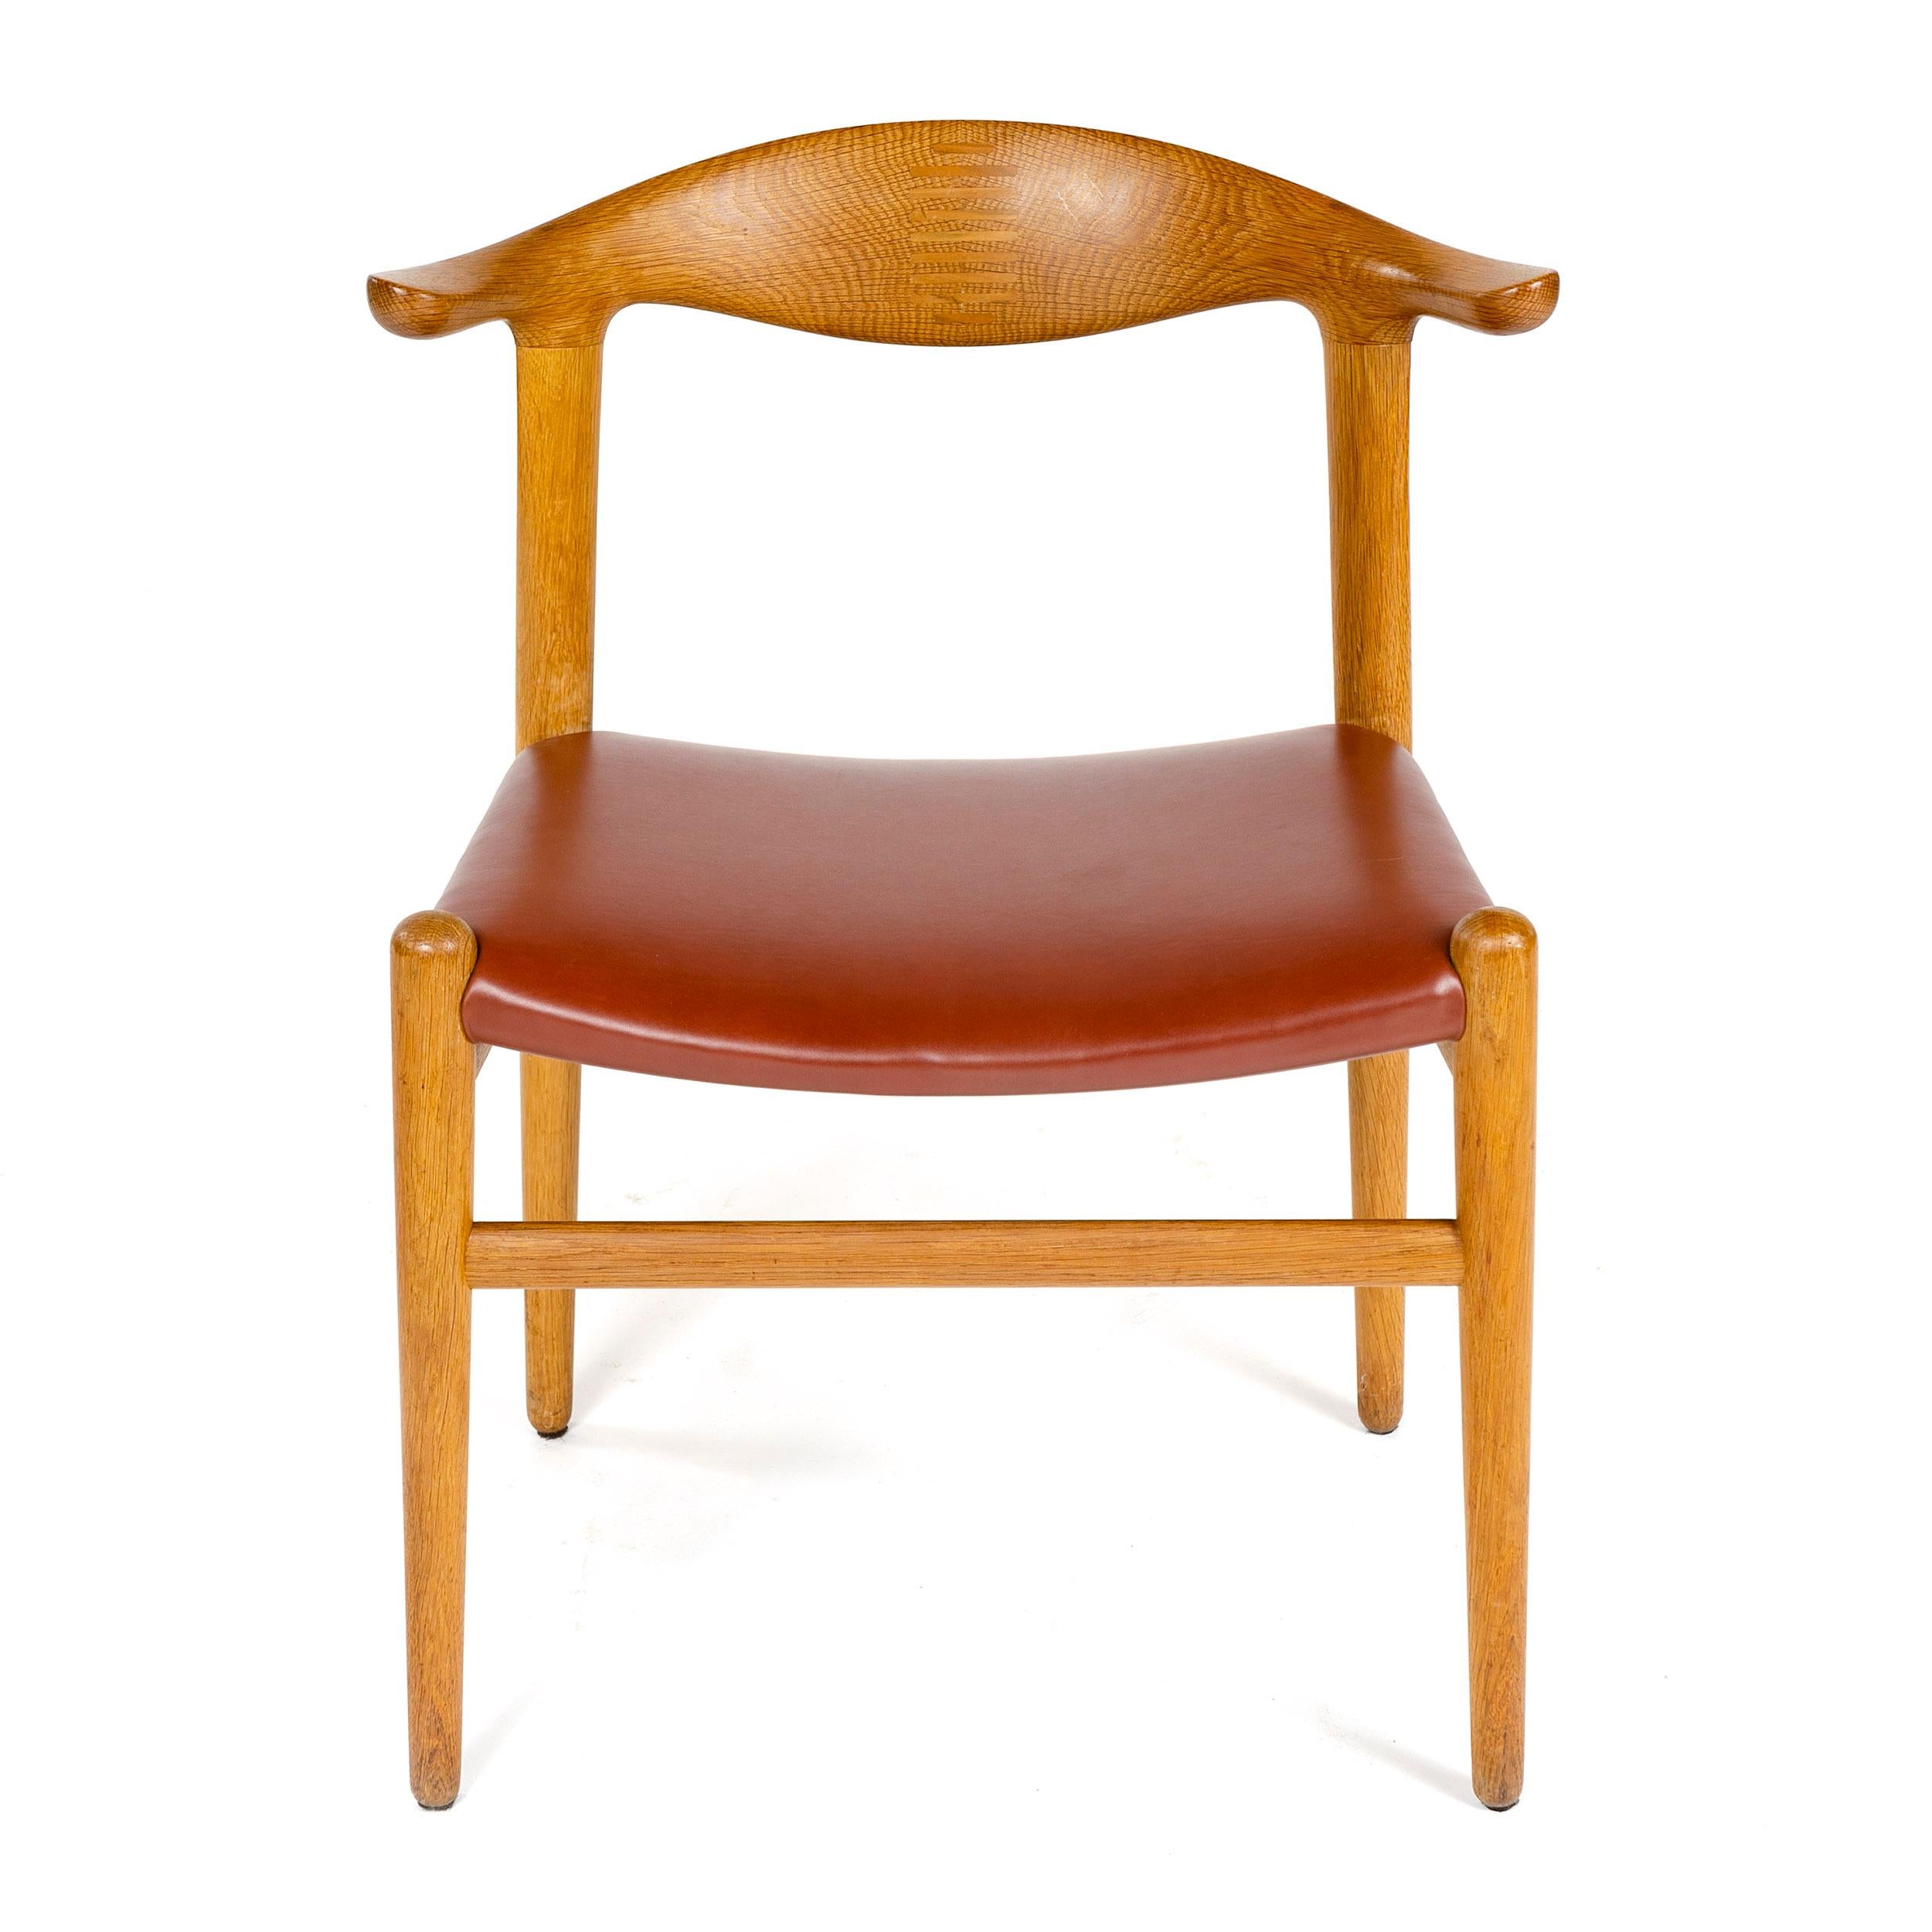 A rare oak 'cow horn' dining chair with a splined backrest and an upholstered leather seat.